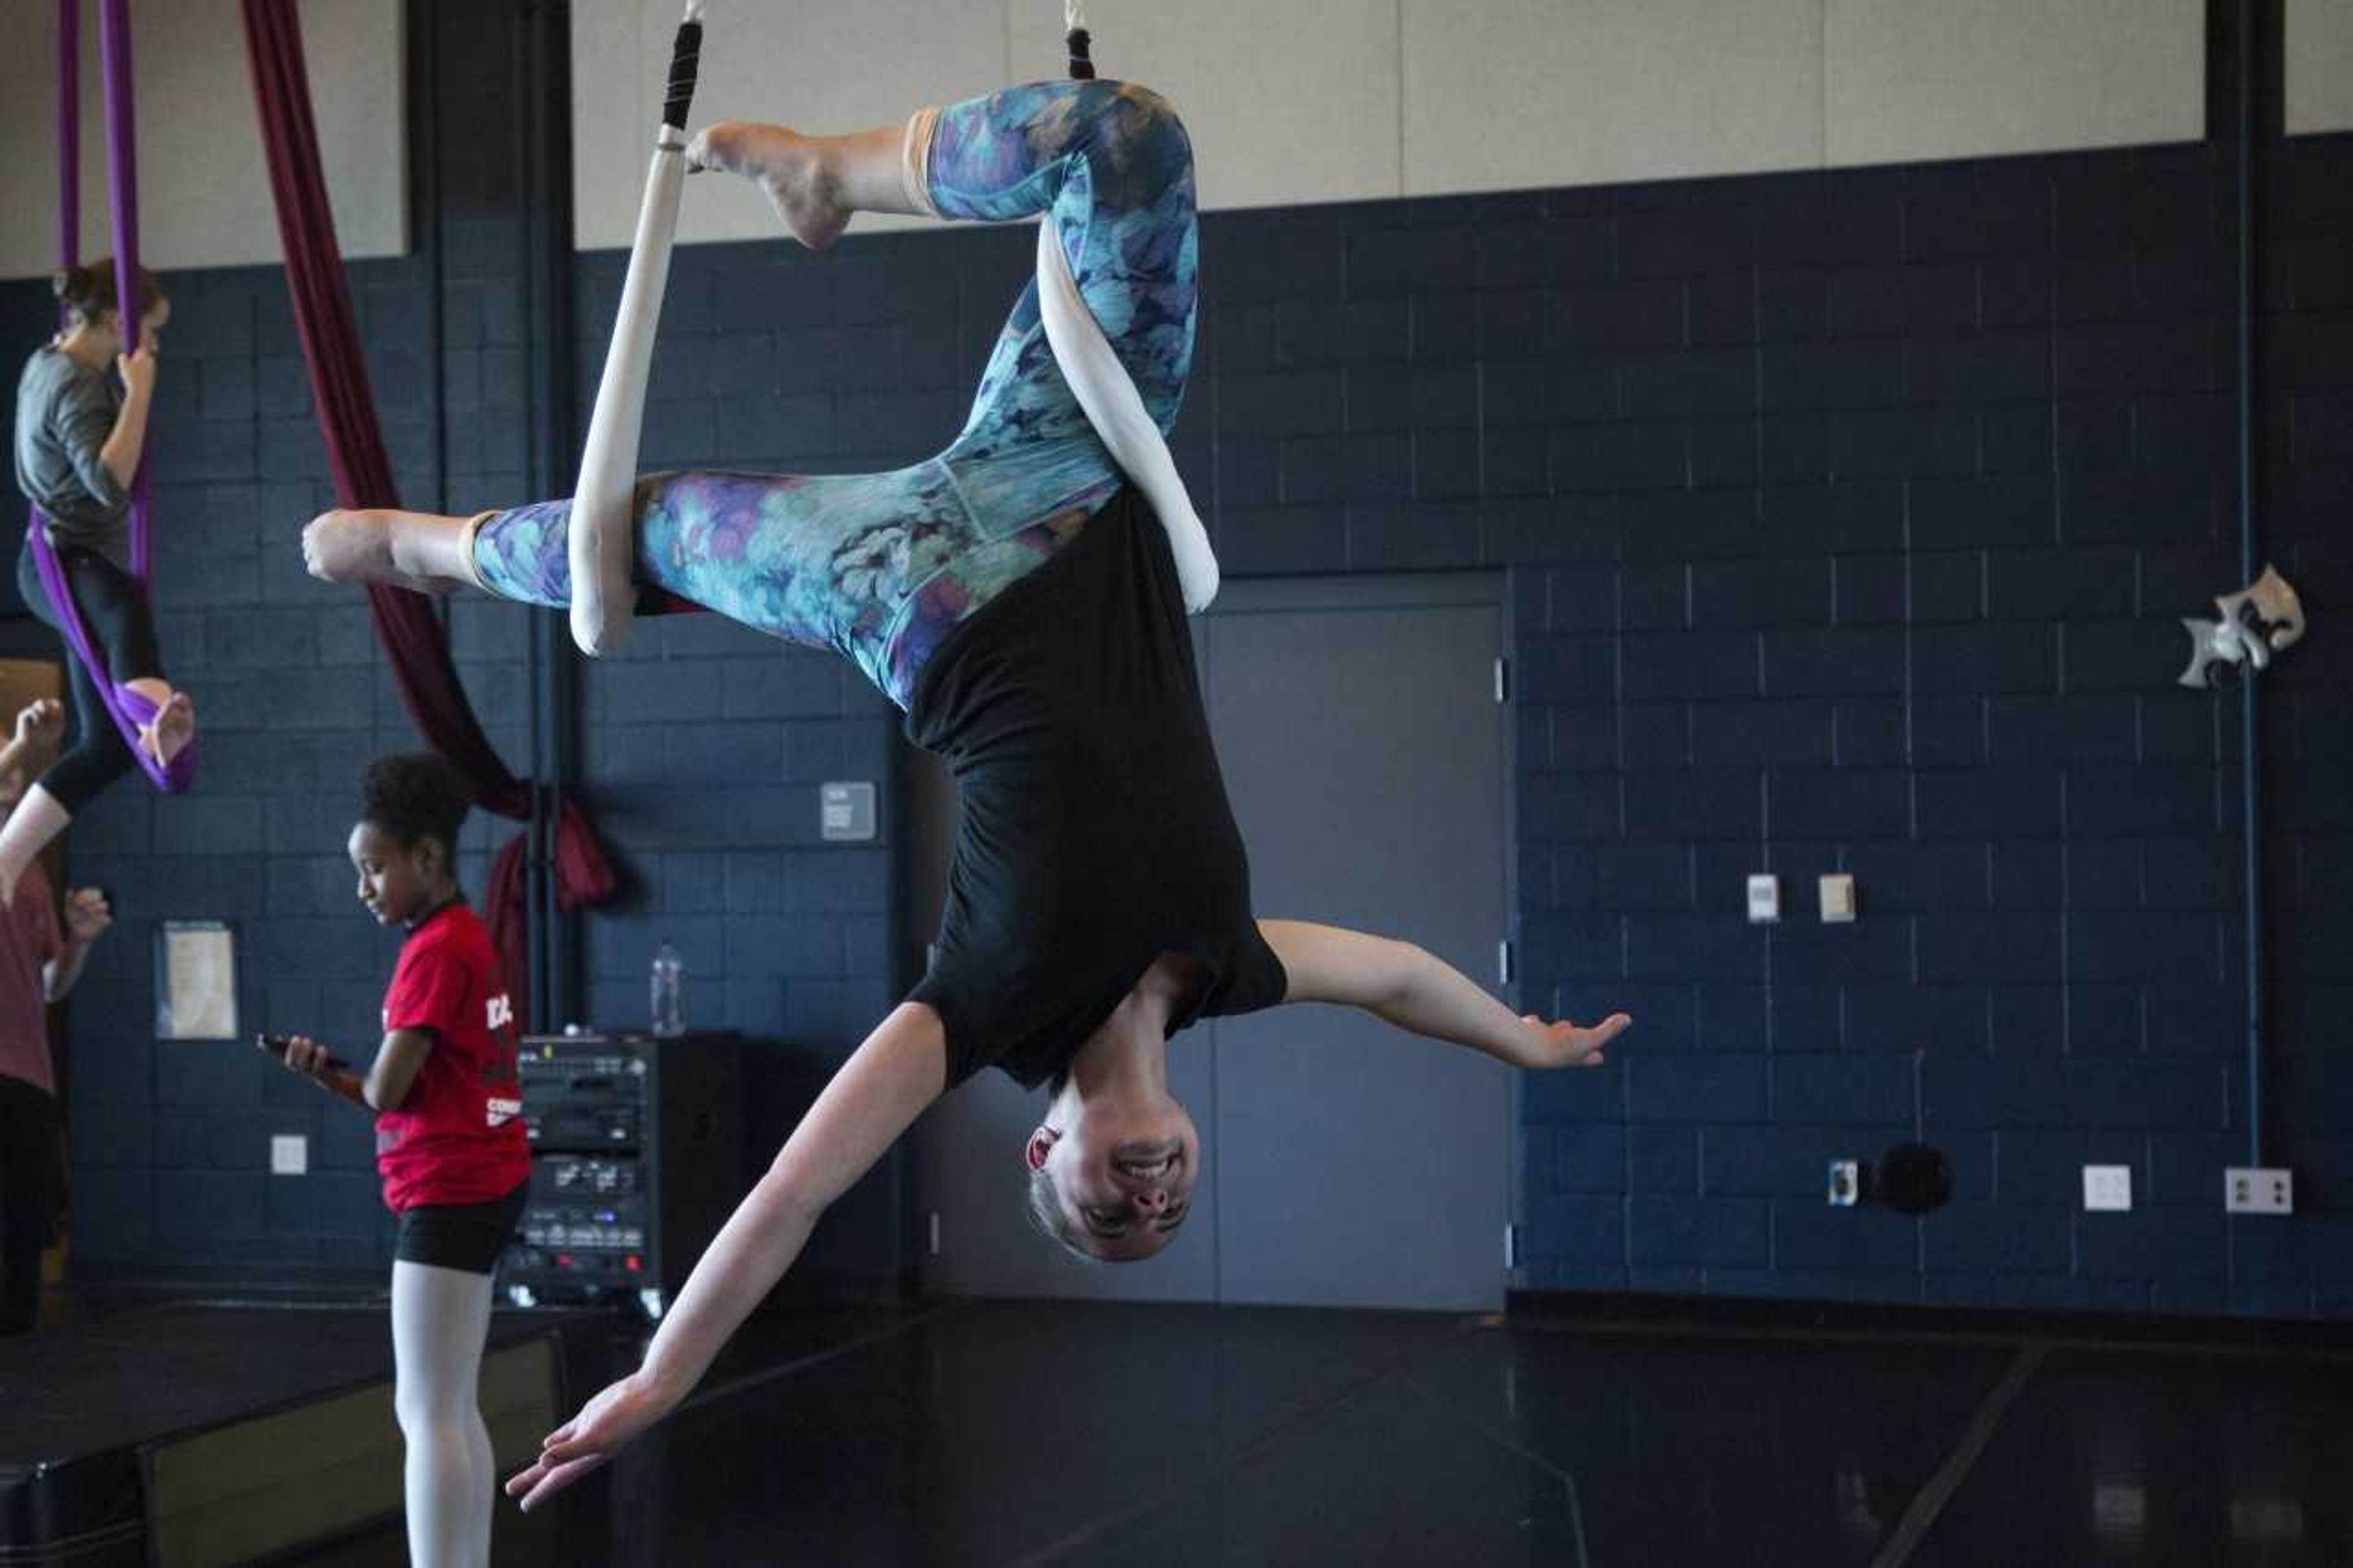 Southeast dance faculty member Hilary Peterson shows off her newfound aerial dance skills, which will soon be brought to the River Campus for the all-new aerial dance program. 